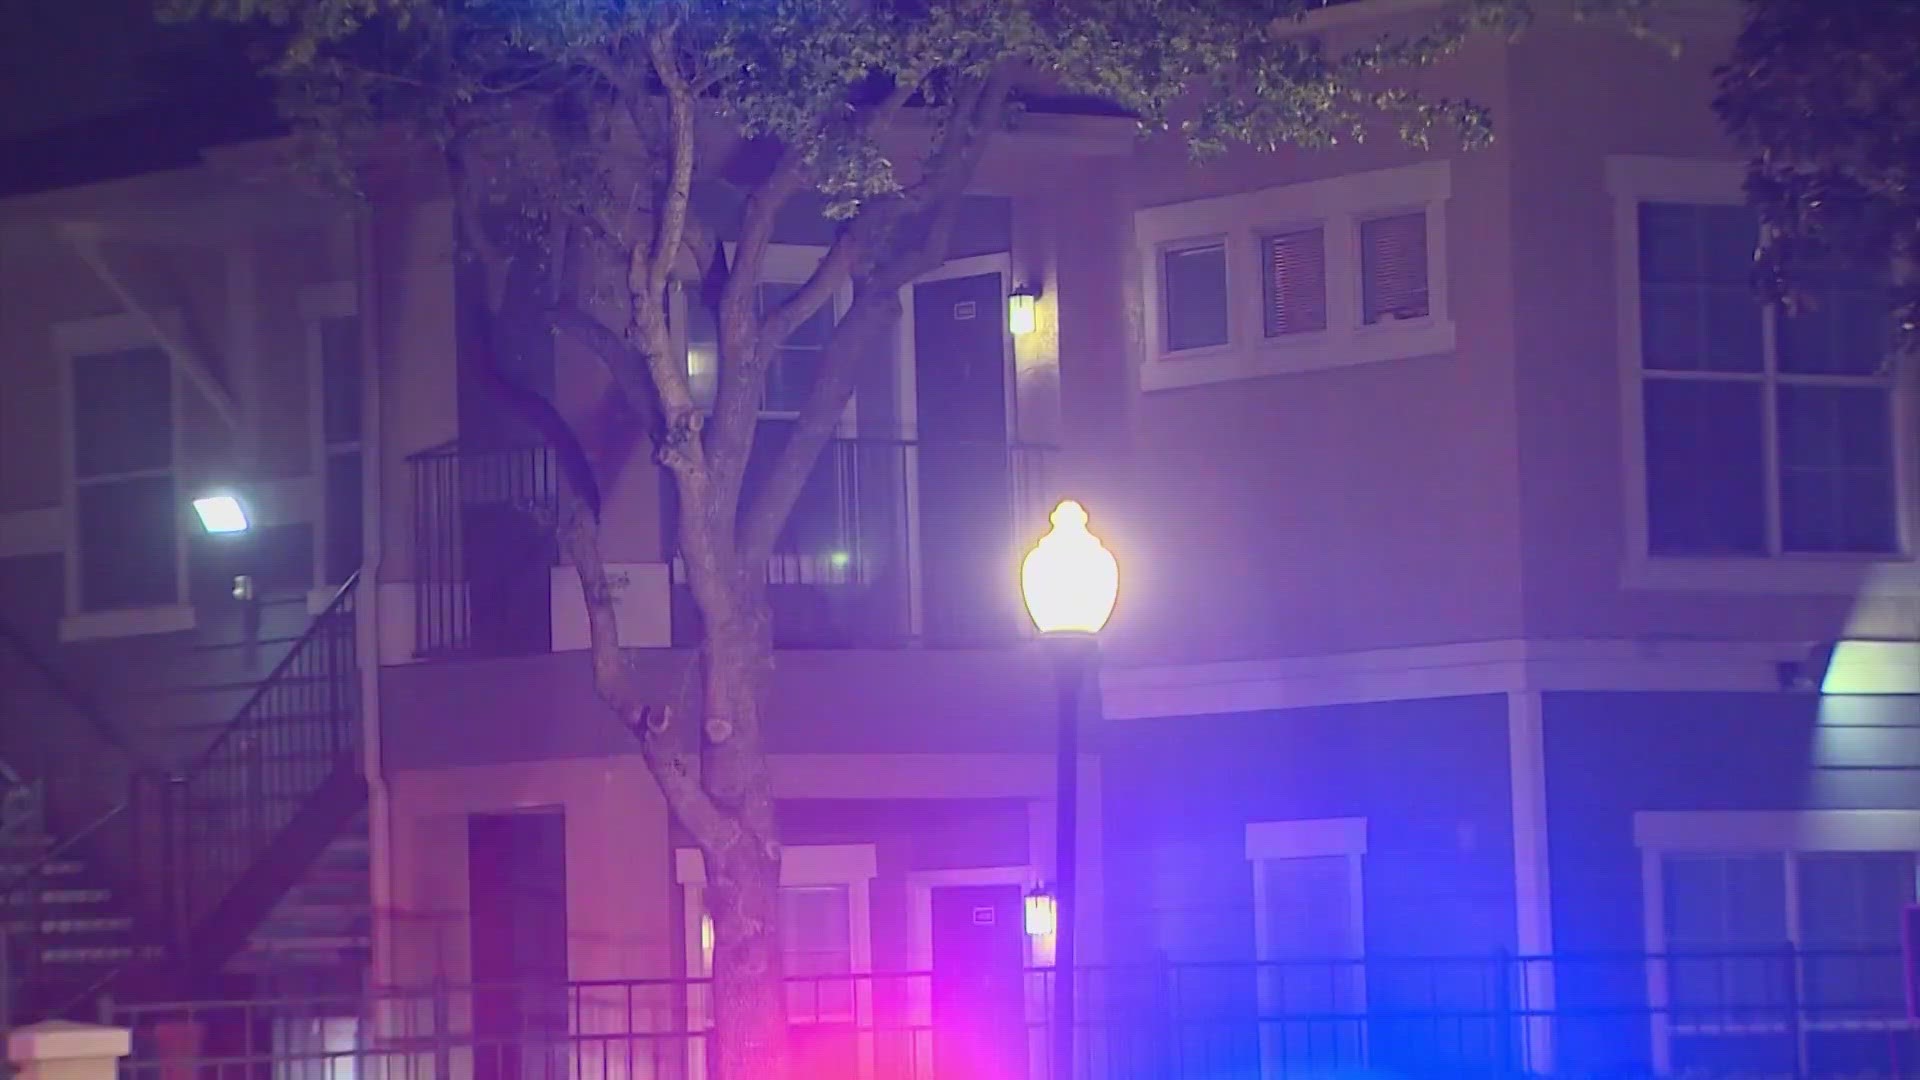 Harris County Sheriff Ed Gonzalez said the shooting happened at an apartment on Sunday night.